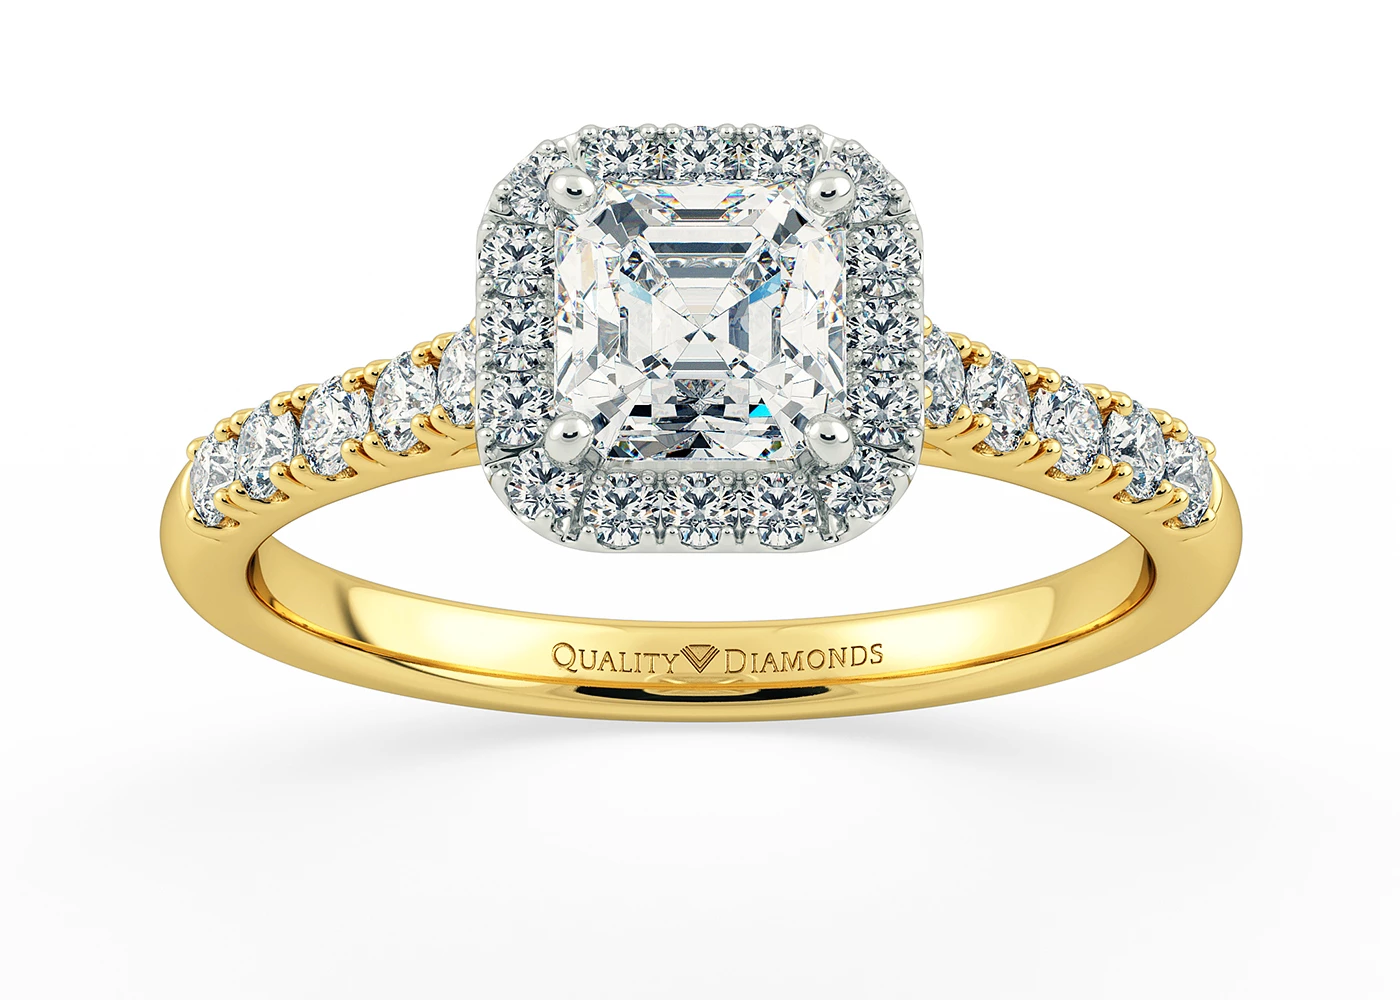 Two Carat Halo Asscher Diamond Ring in 18K Yellow Gold